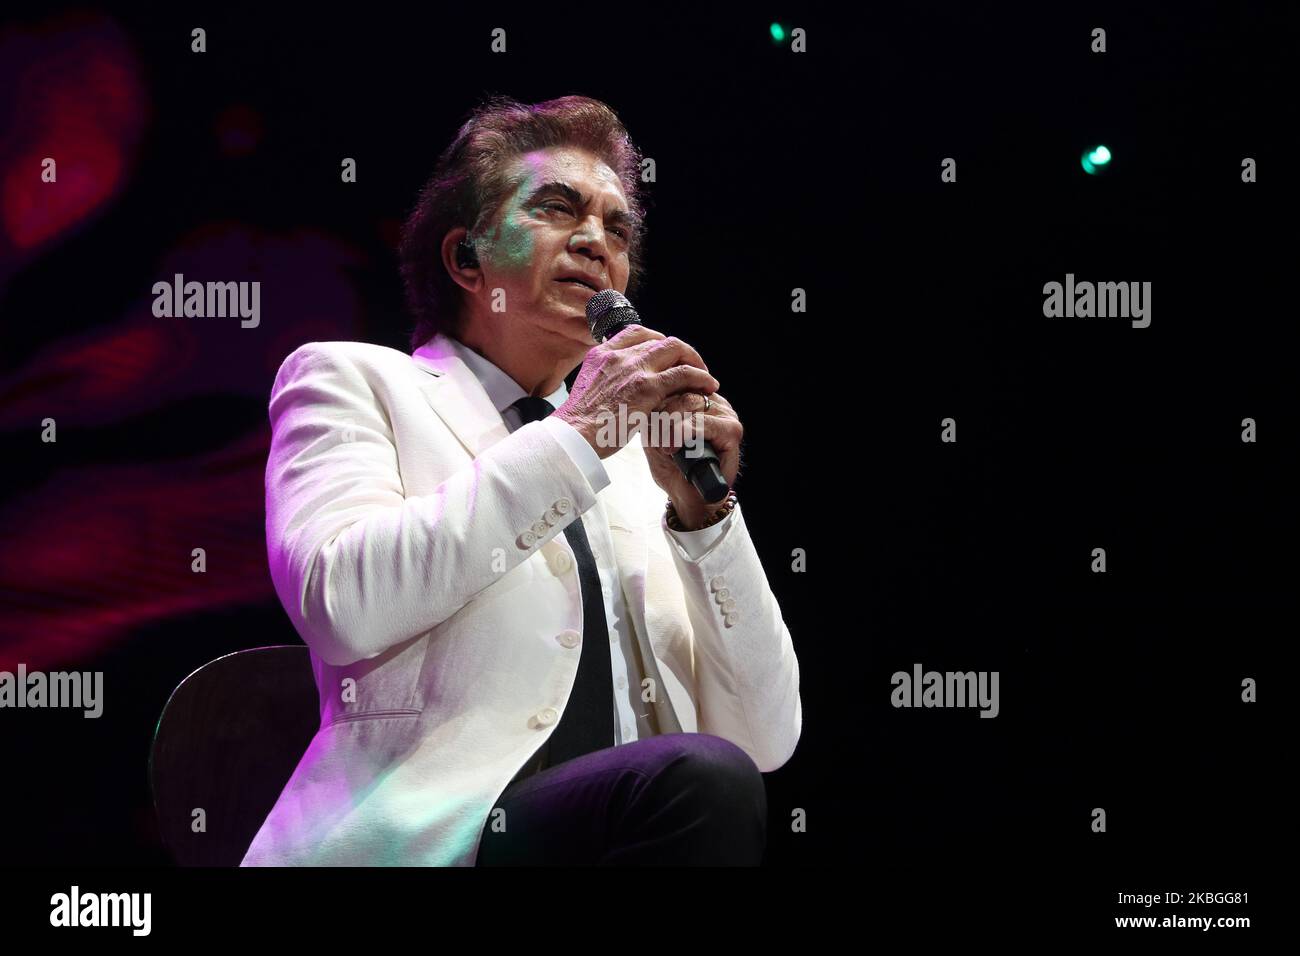 Venezuelan singer of 77 years Jose Luis Rodriguez 'El Puma' is seen singing  on stage during his Agradecido Tour at Mexico City Arena. on February 7,  2020 in Mexico City, Mexico (Photo